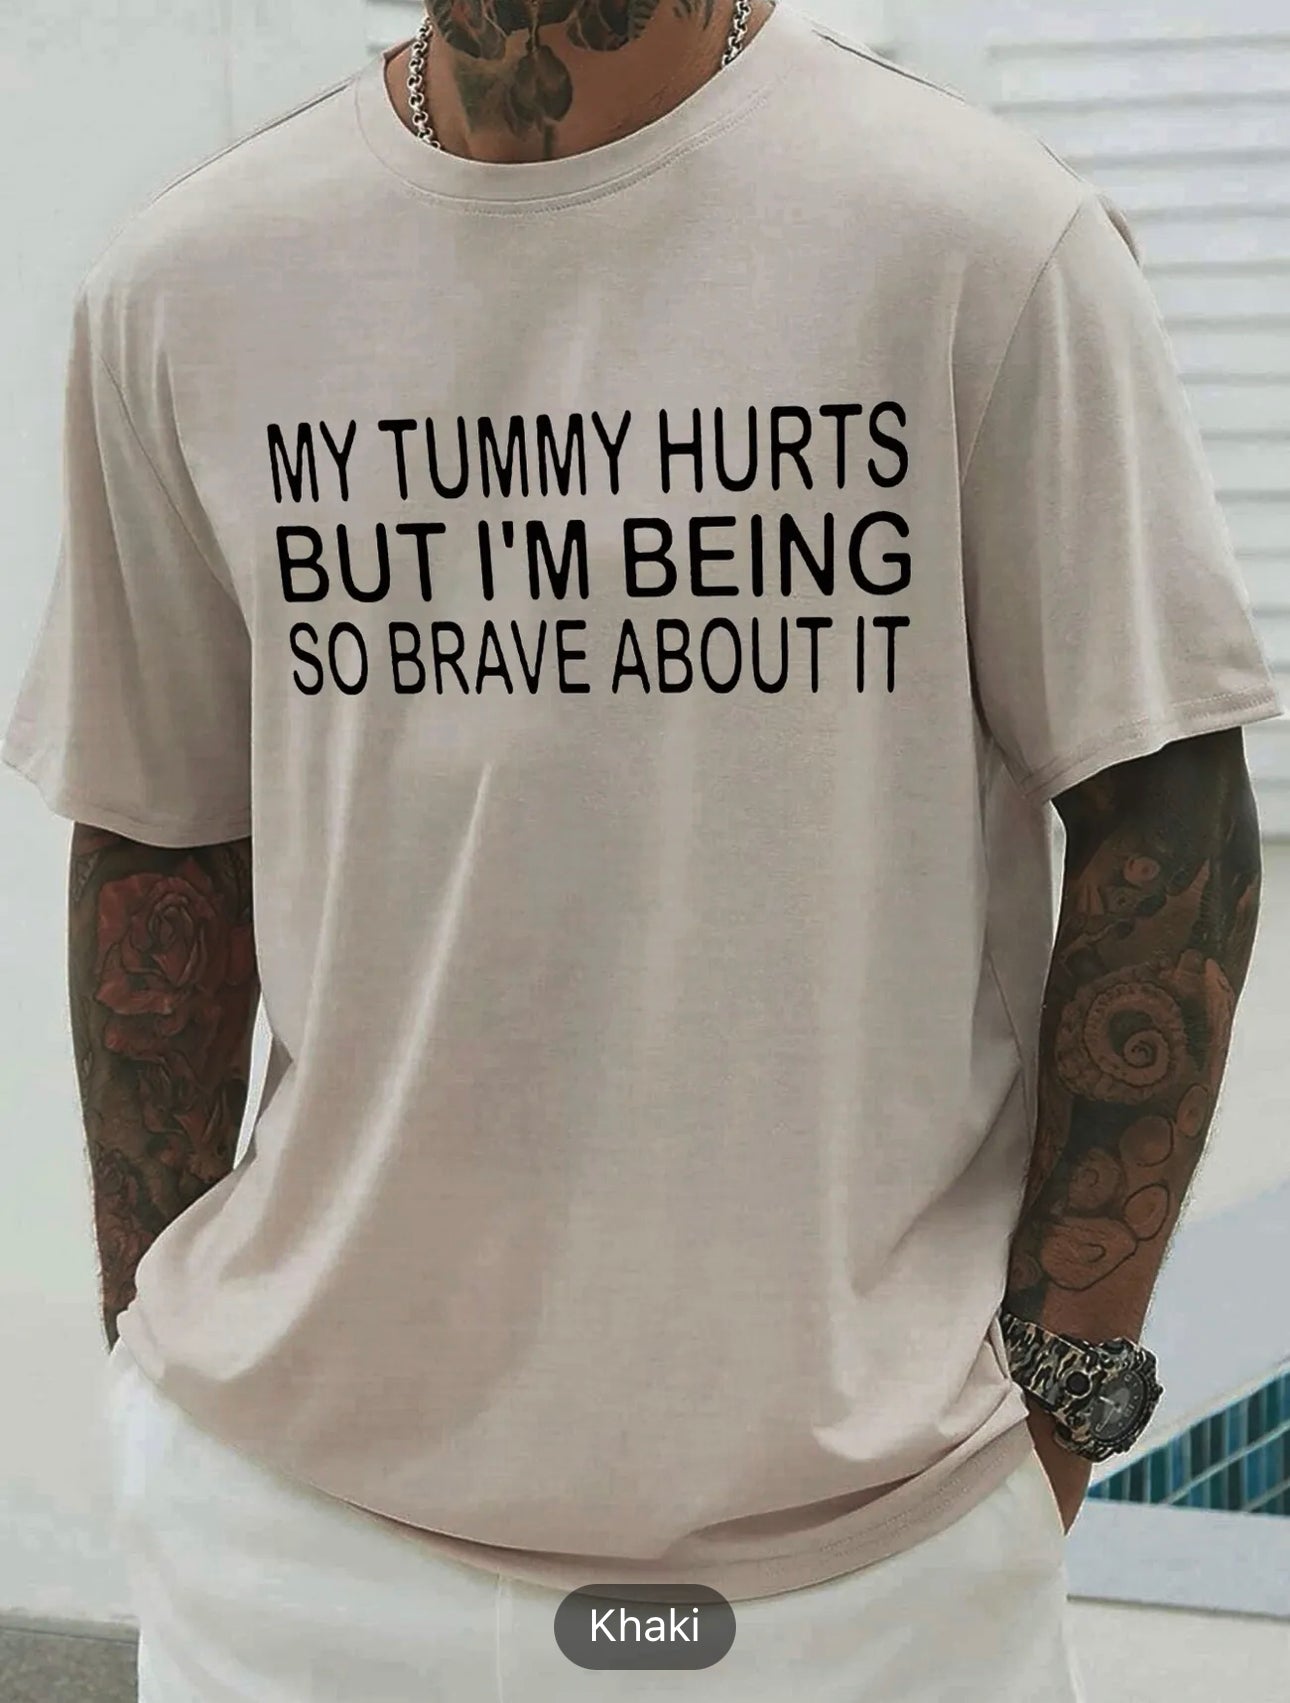 Plus Size Men's Casual T-shirts, "My Tummy Hurts" Trendy Comfortable Short Sleeve Tees, Summer Elastic Round Neck Oversized Loose Tops